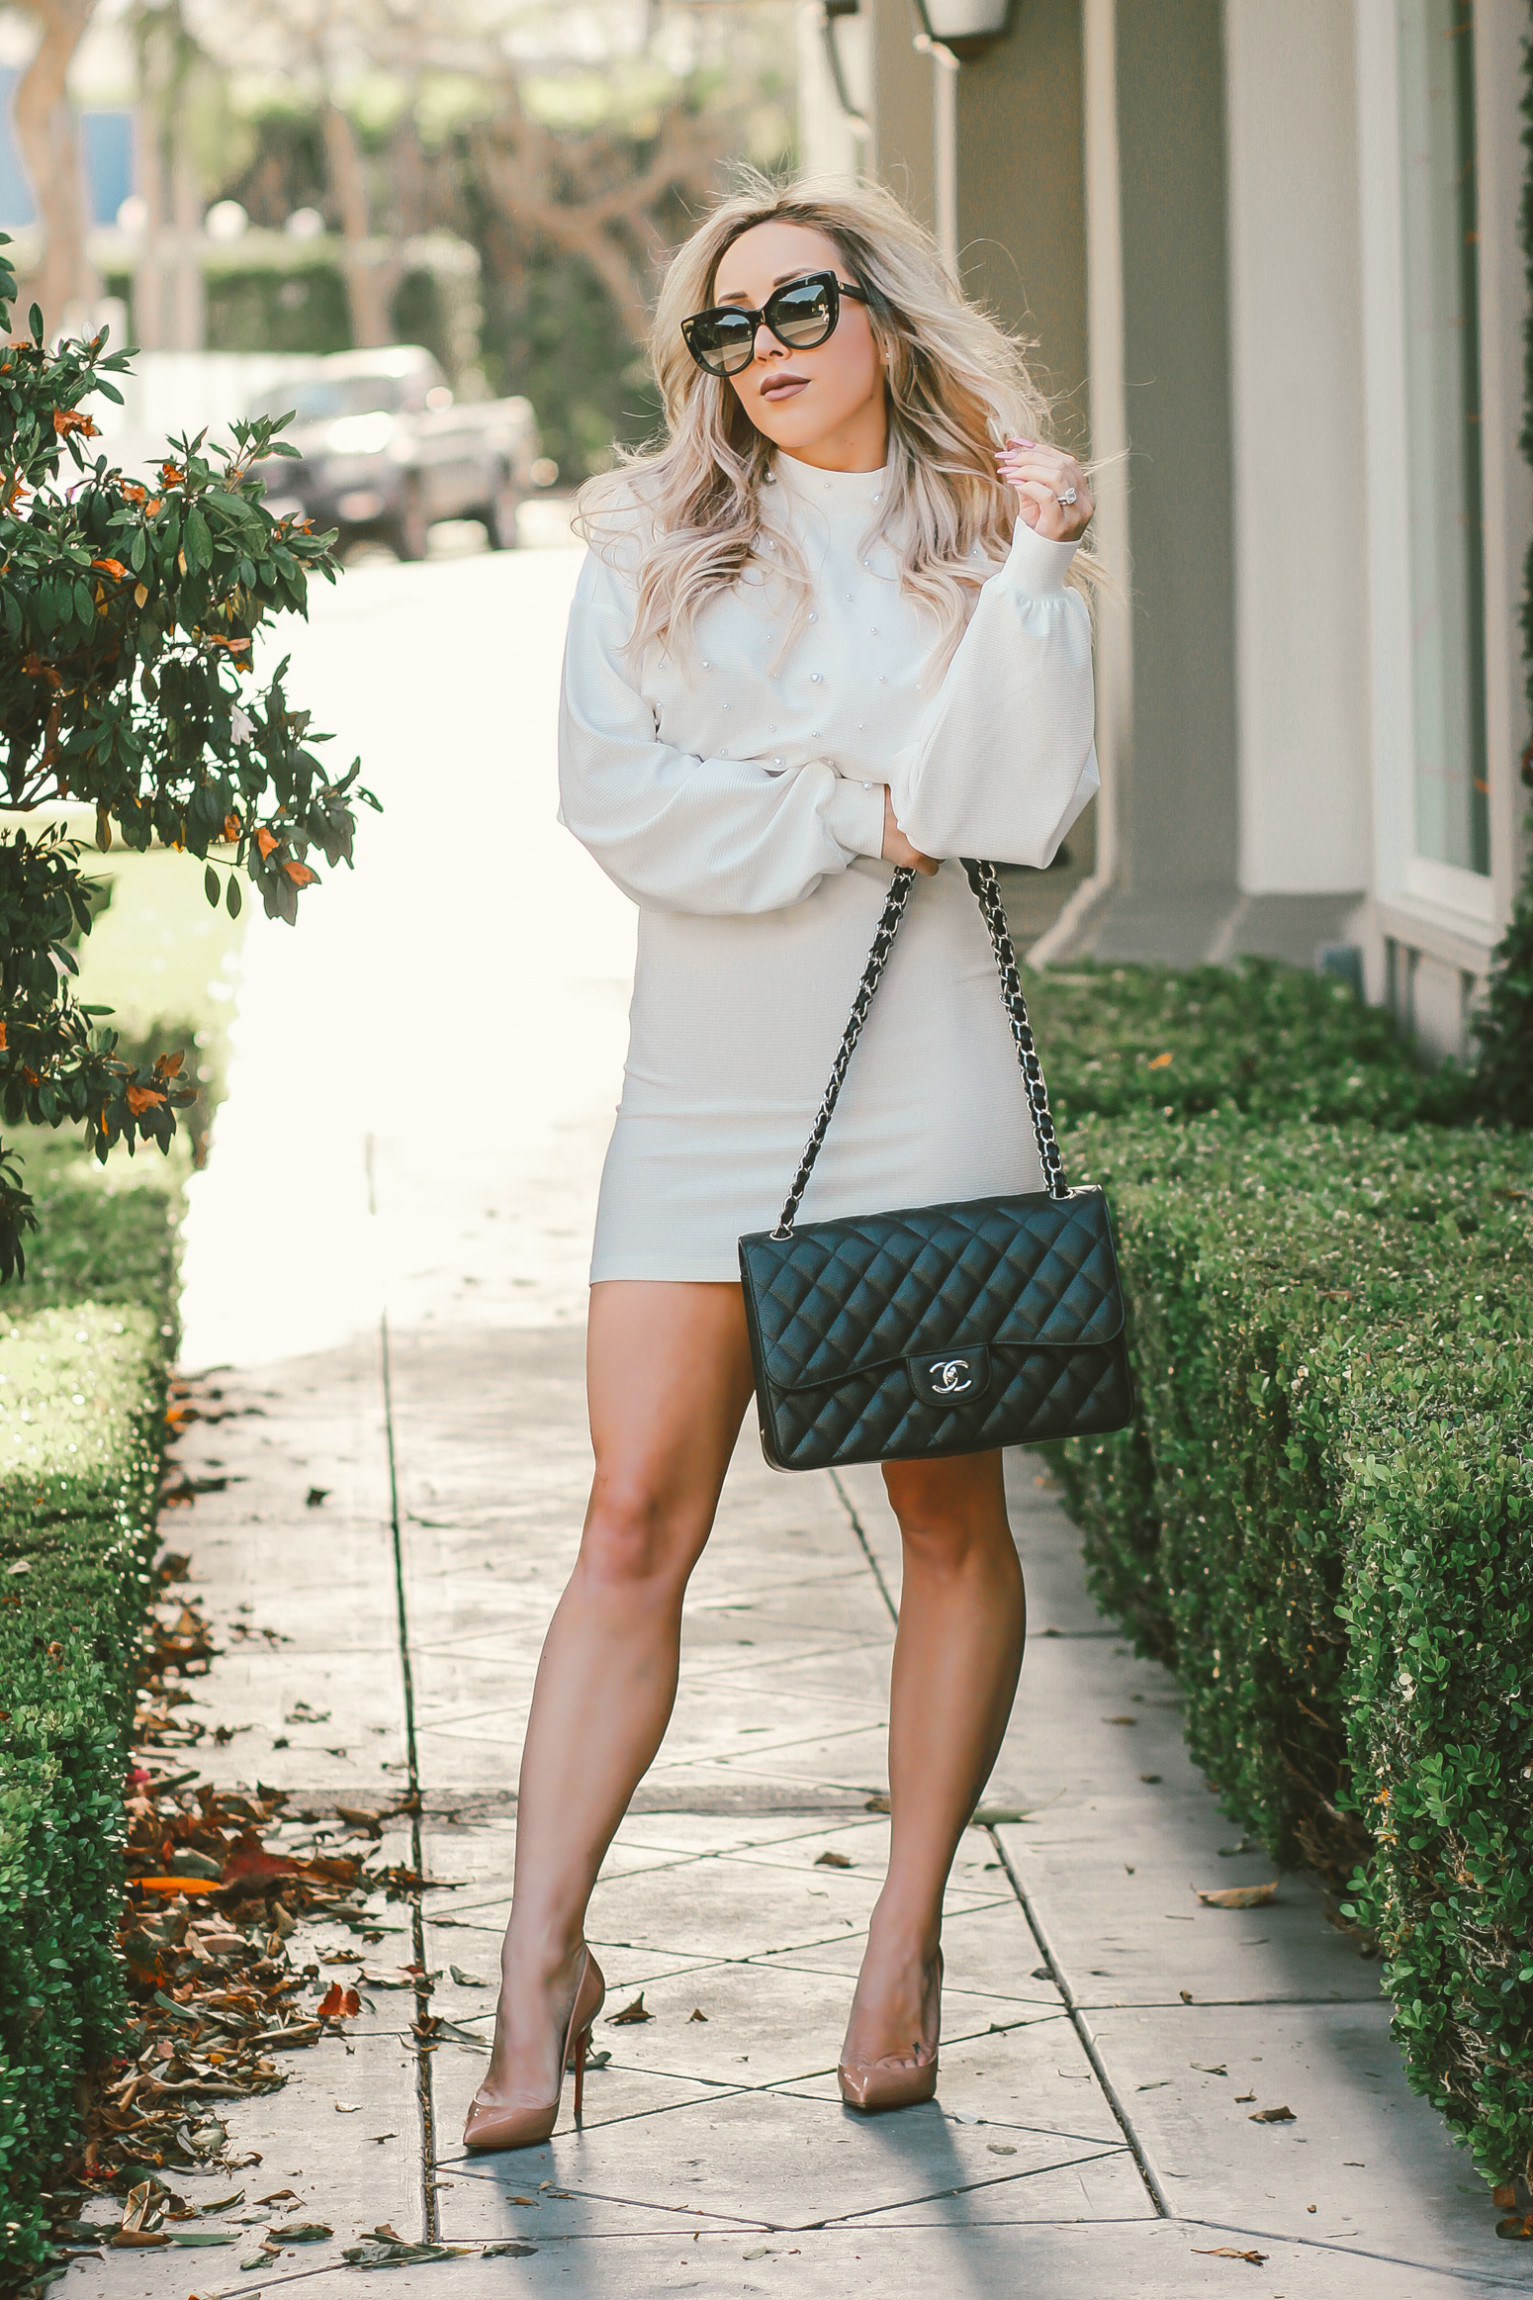 White Pearl Dress, Nude Louboutins, Black Chanel Bag | Blondie in the City by Hayley Larue